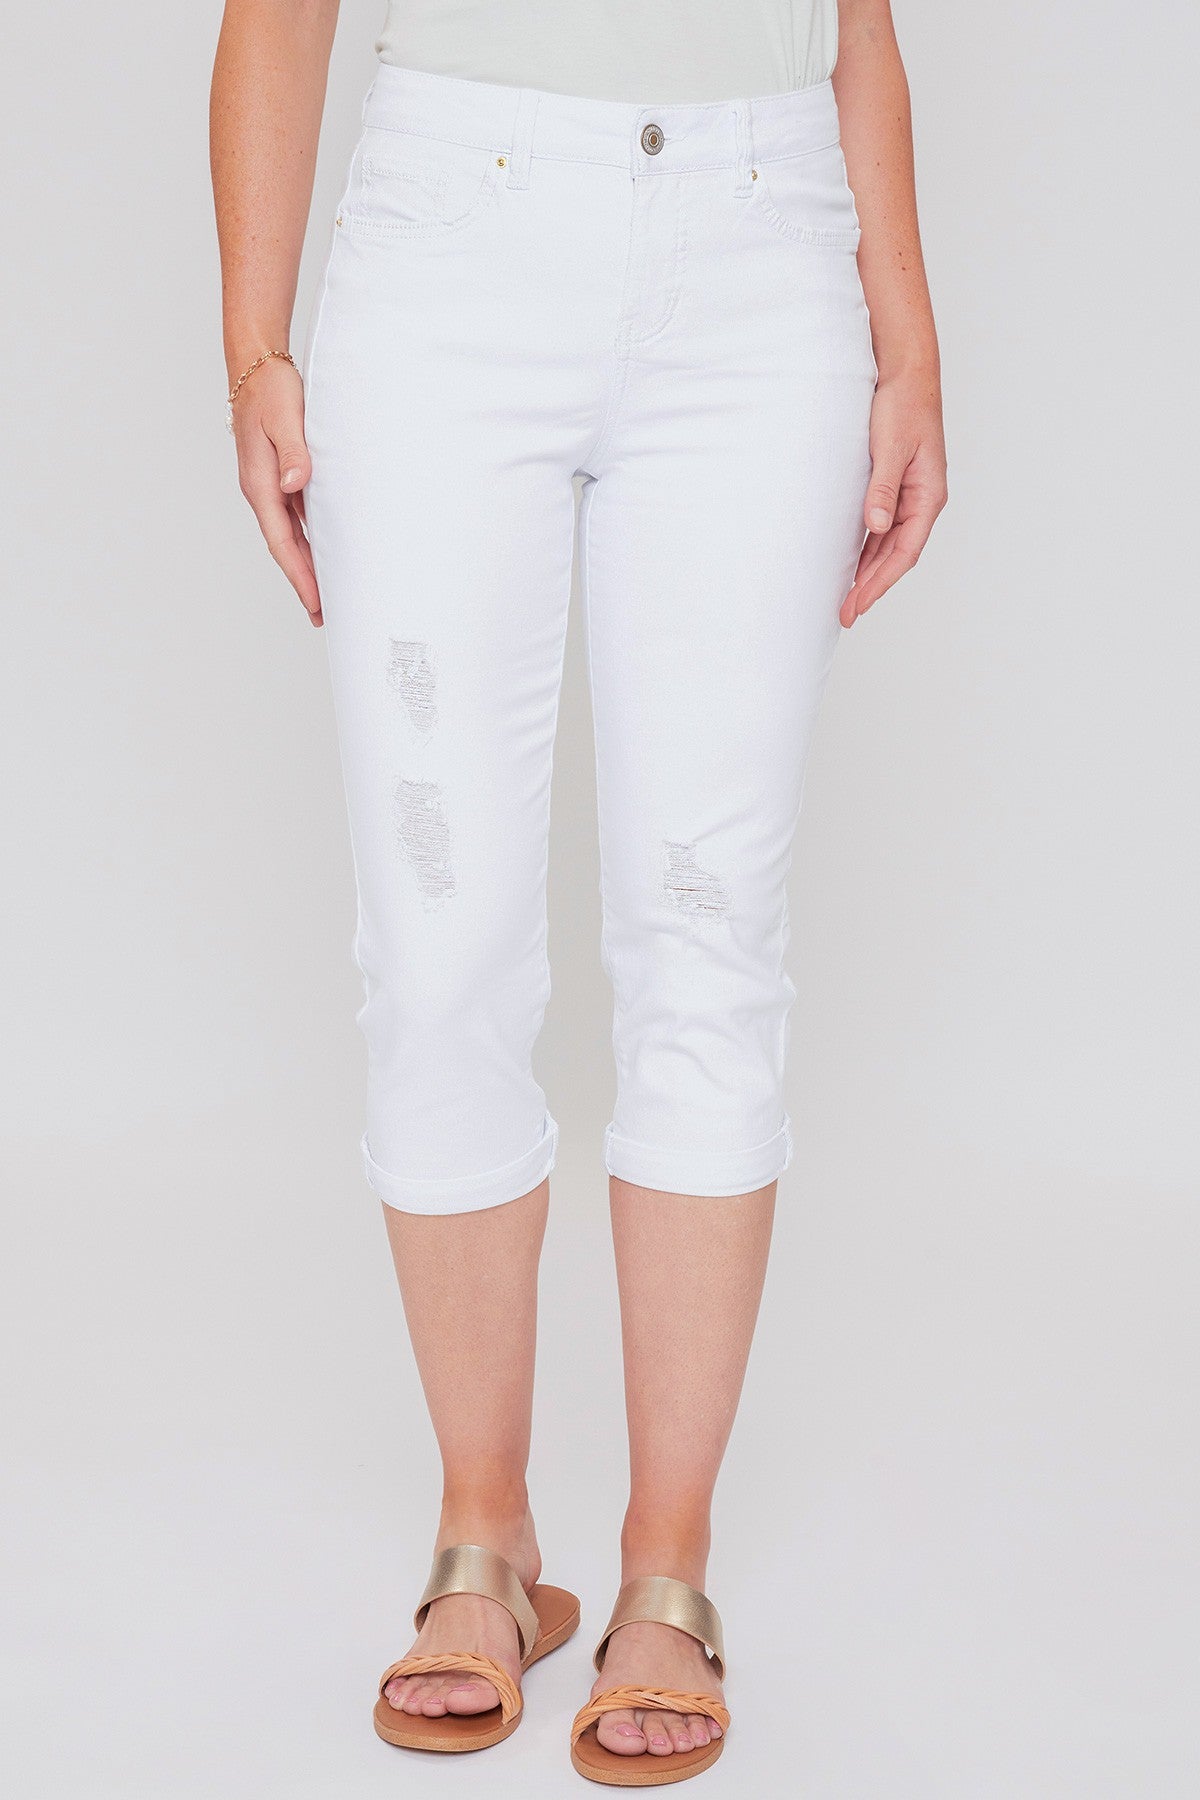 Missy Slim Stretch Cuffed Capri Jeans, Pack Of 12 from Royalty for